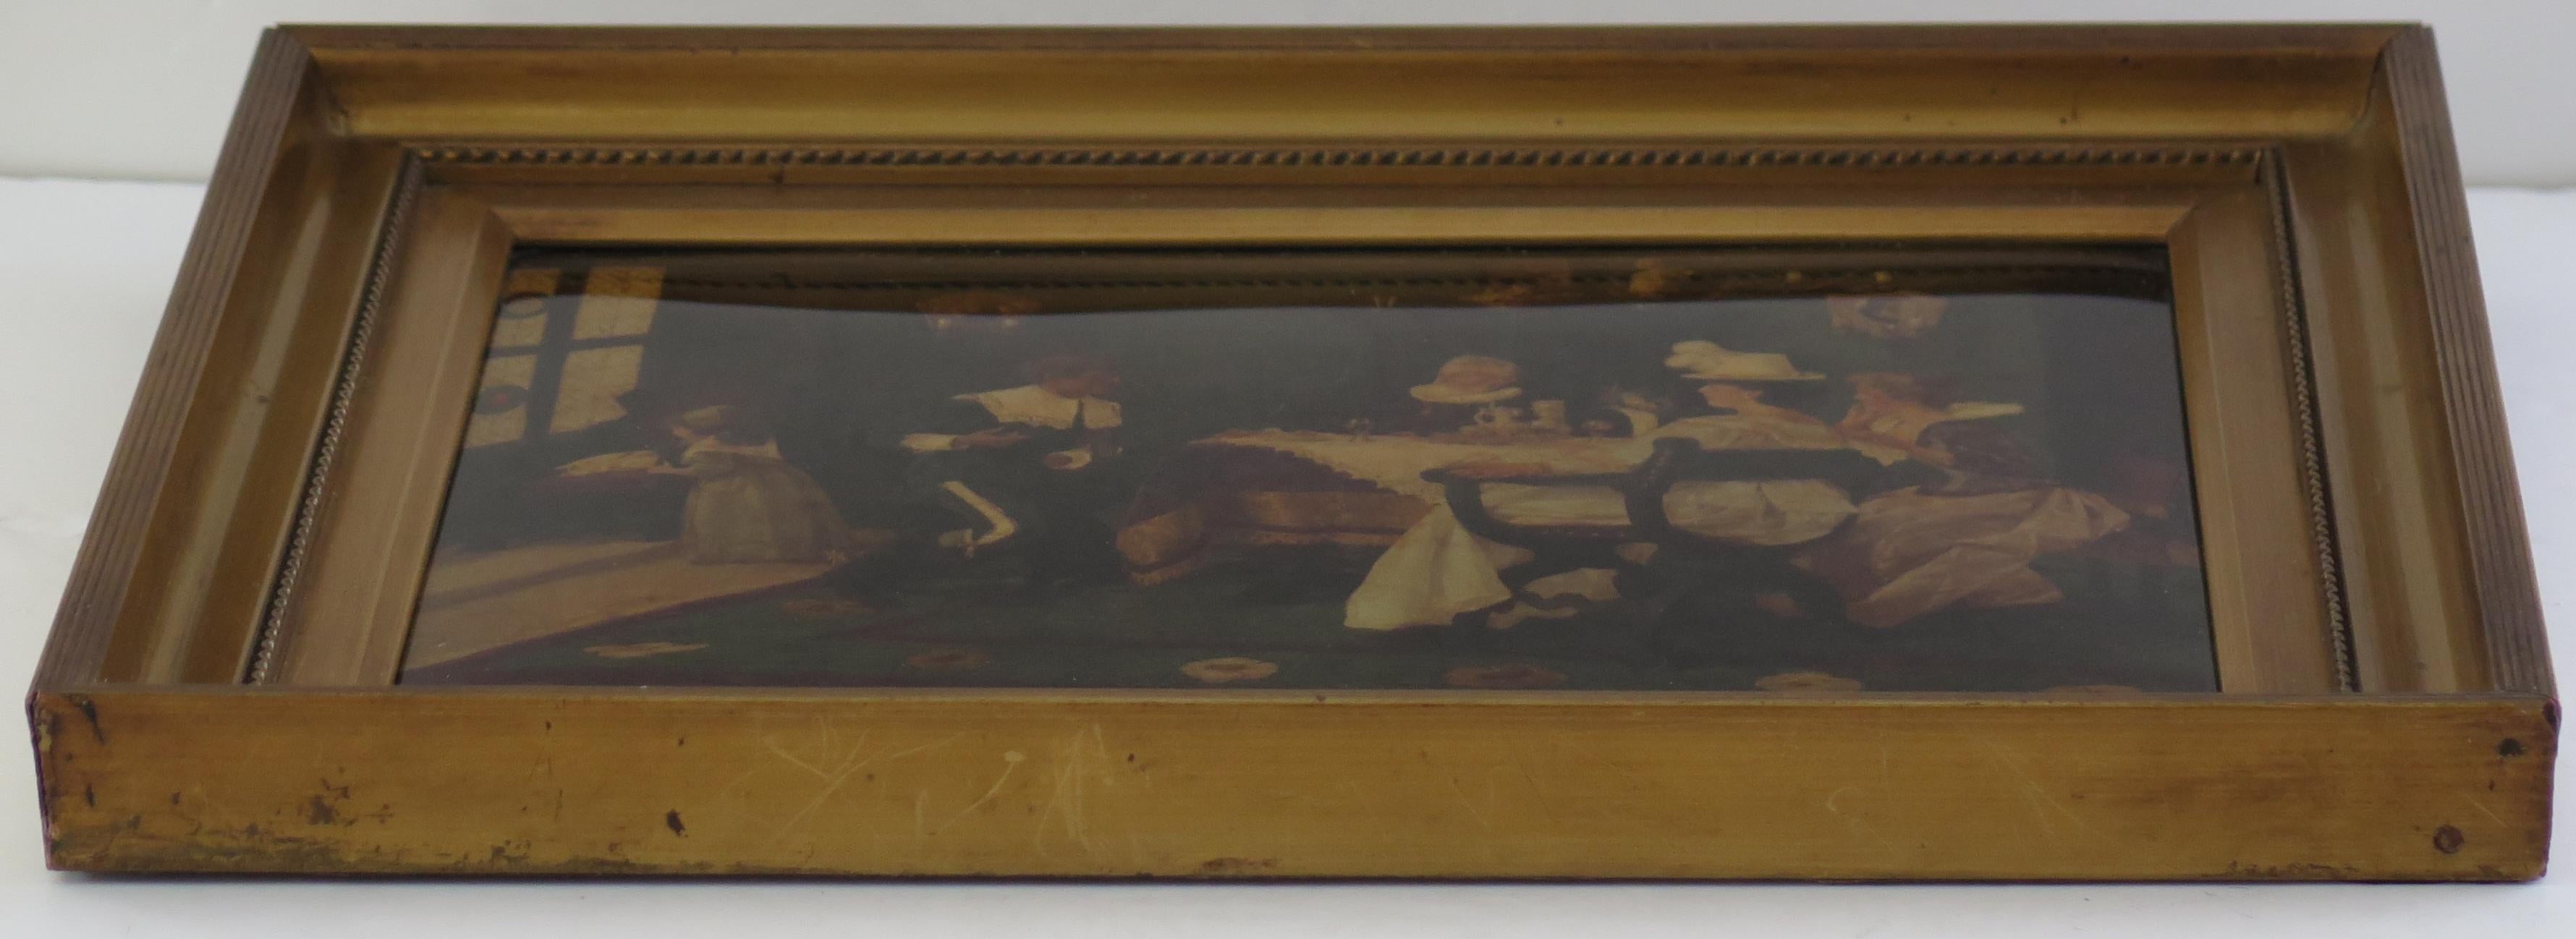 Glass J H Schroder Crystoleum Picture German, Signed and Dated 1899 For Sale